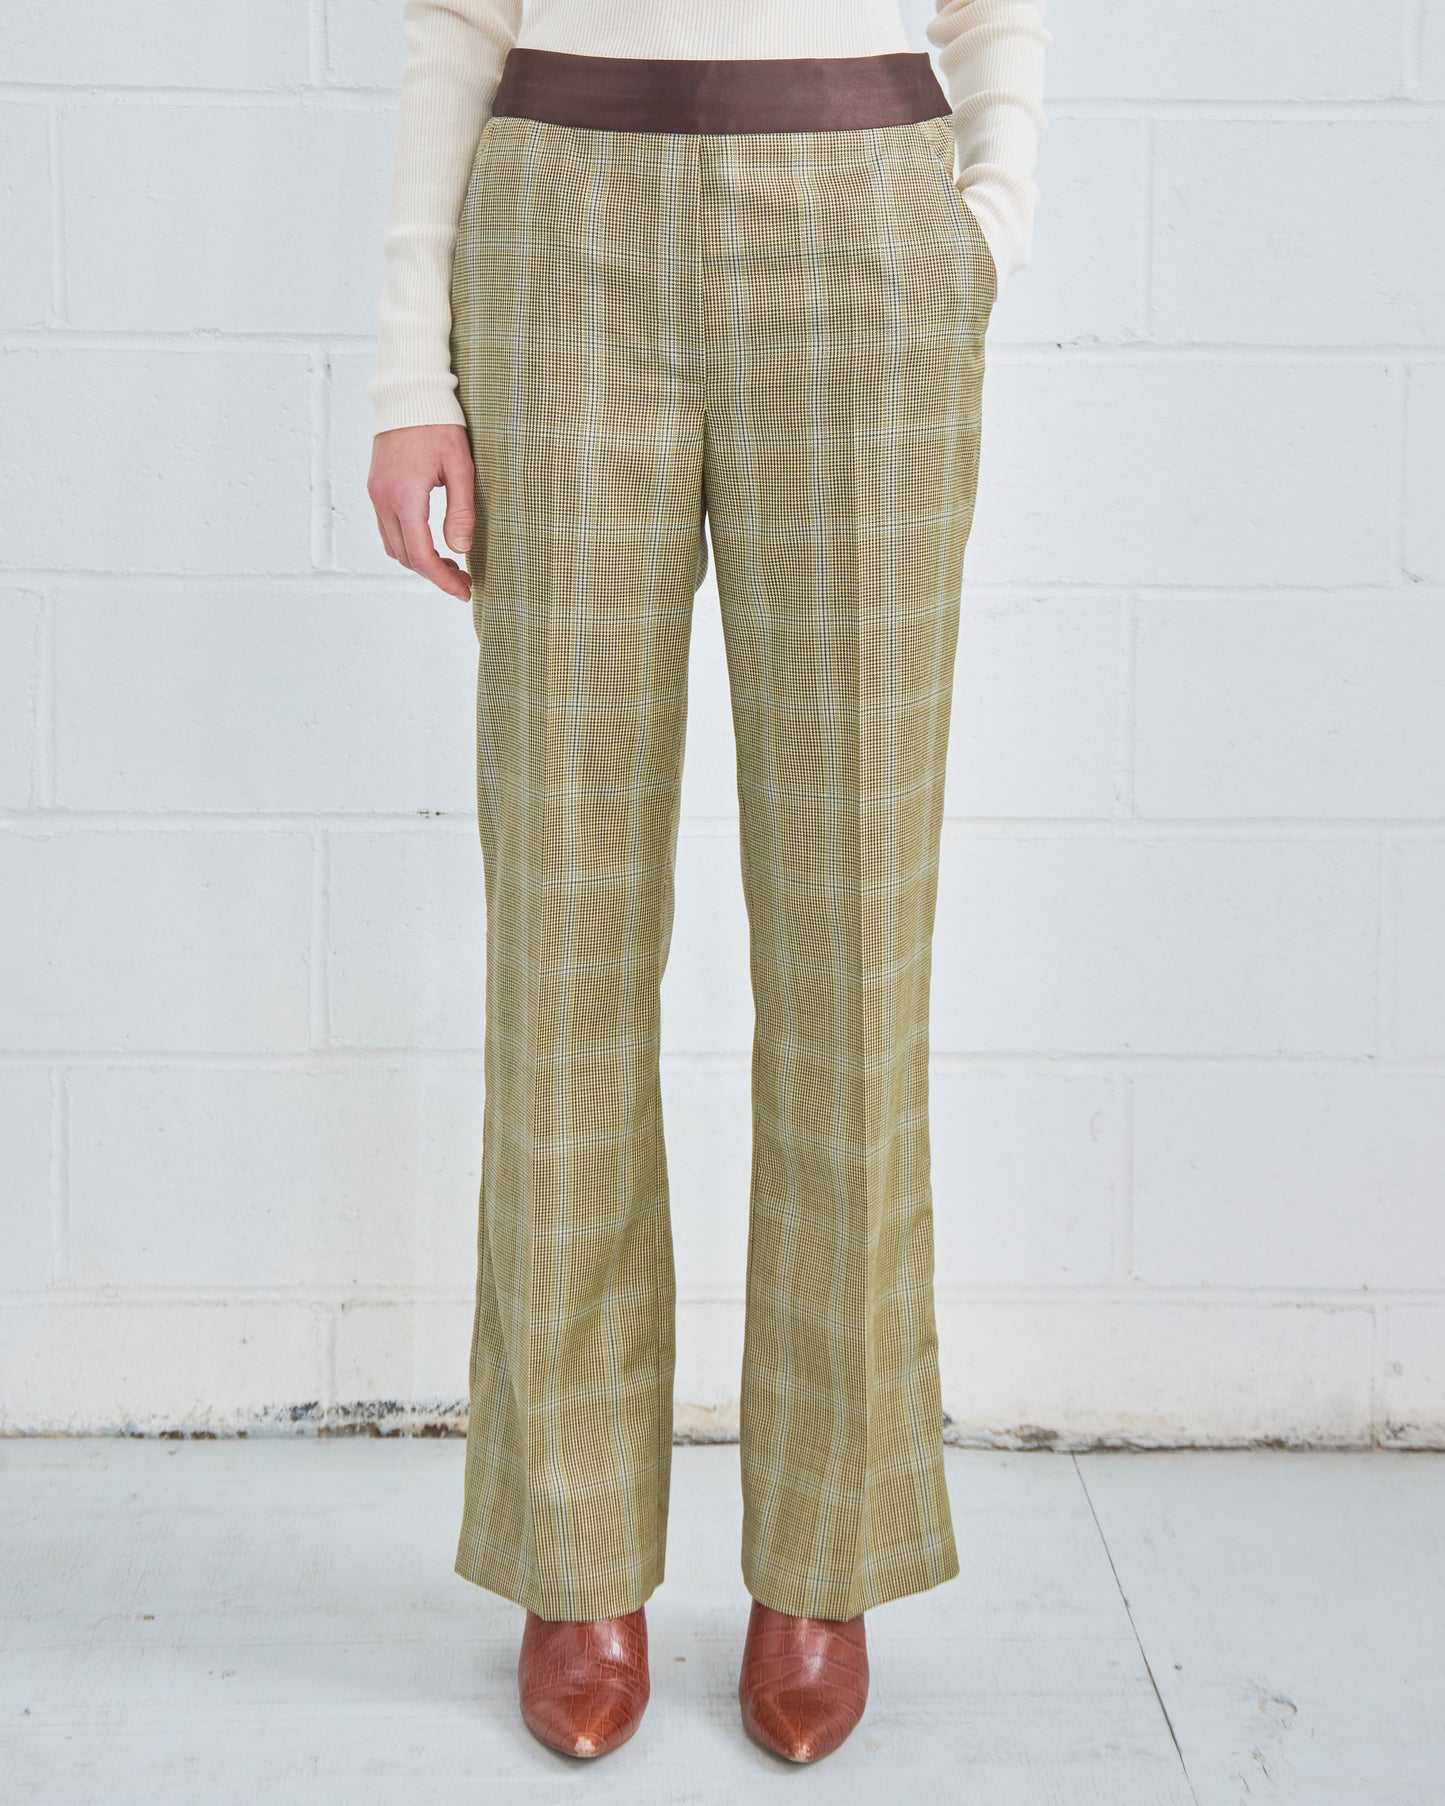 The Bianca Trouser